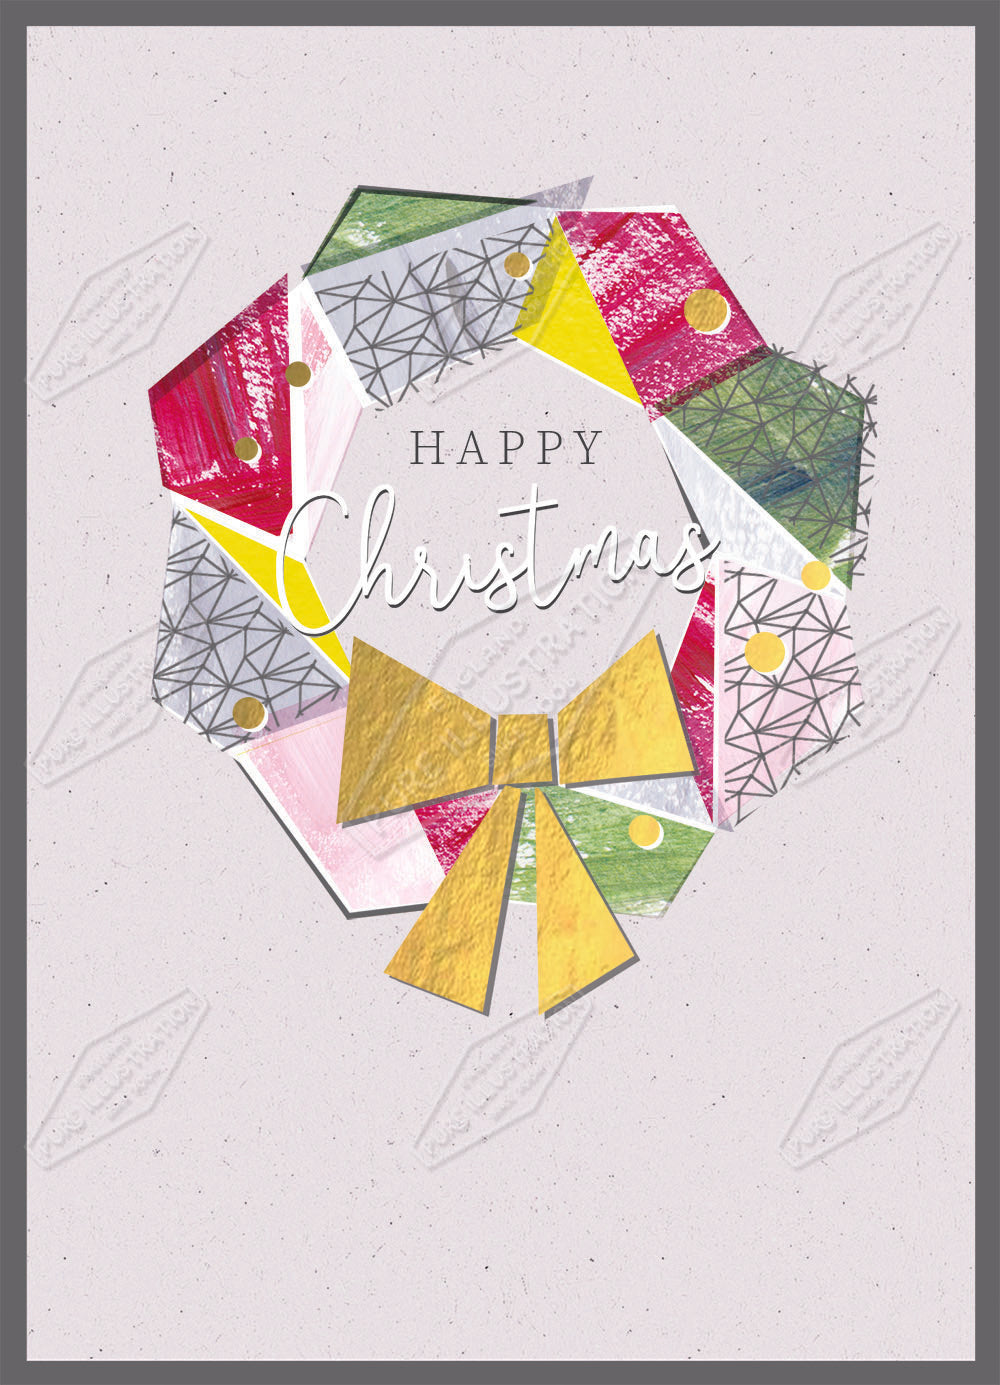 00030189SLA- Sarah Lake is represented by Pure Art Licensing Agency - Christmas Greeting Card Design